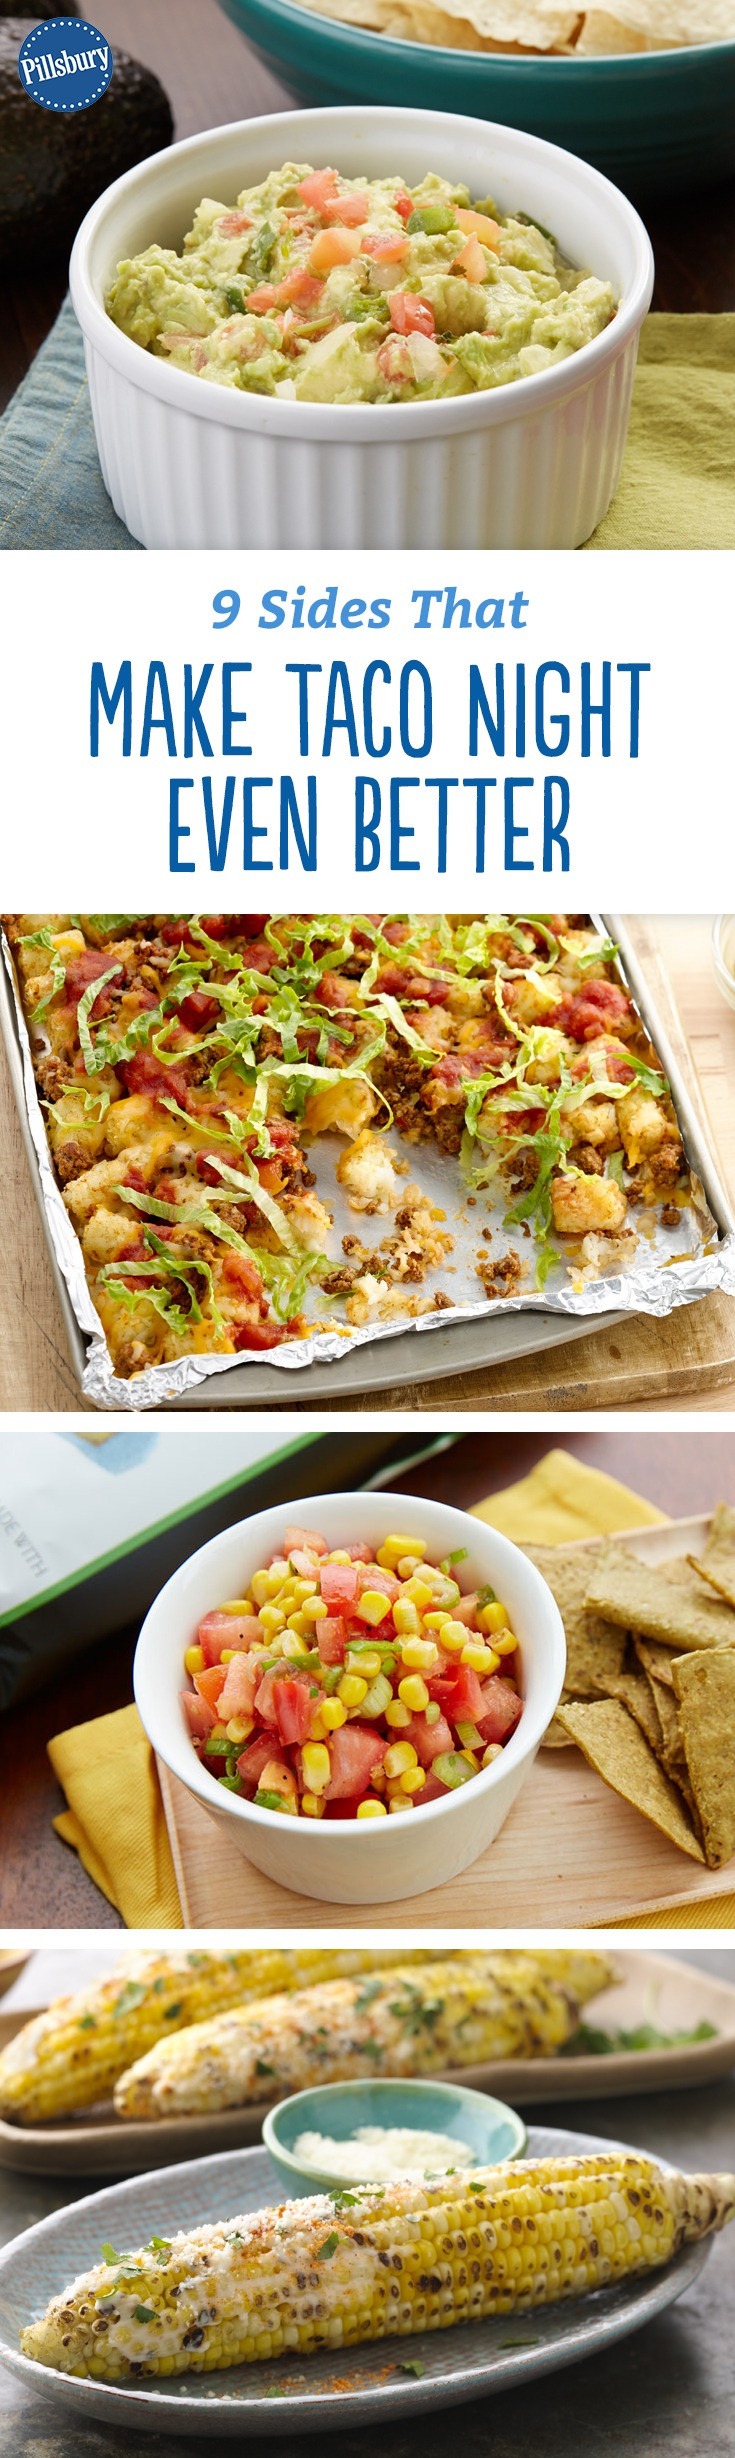 Taco Night Side Dishes
 9 Sides That Make Taco Night Even Better